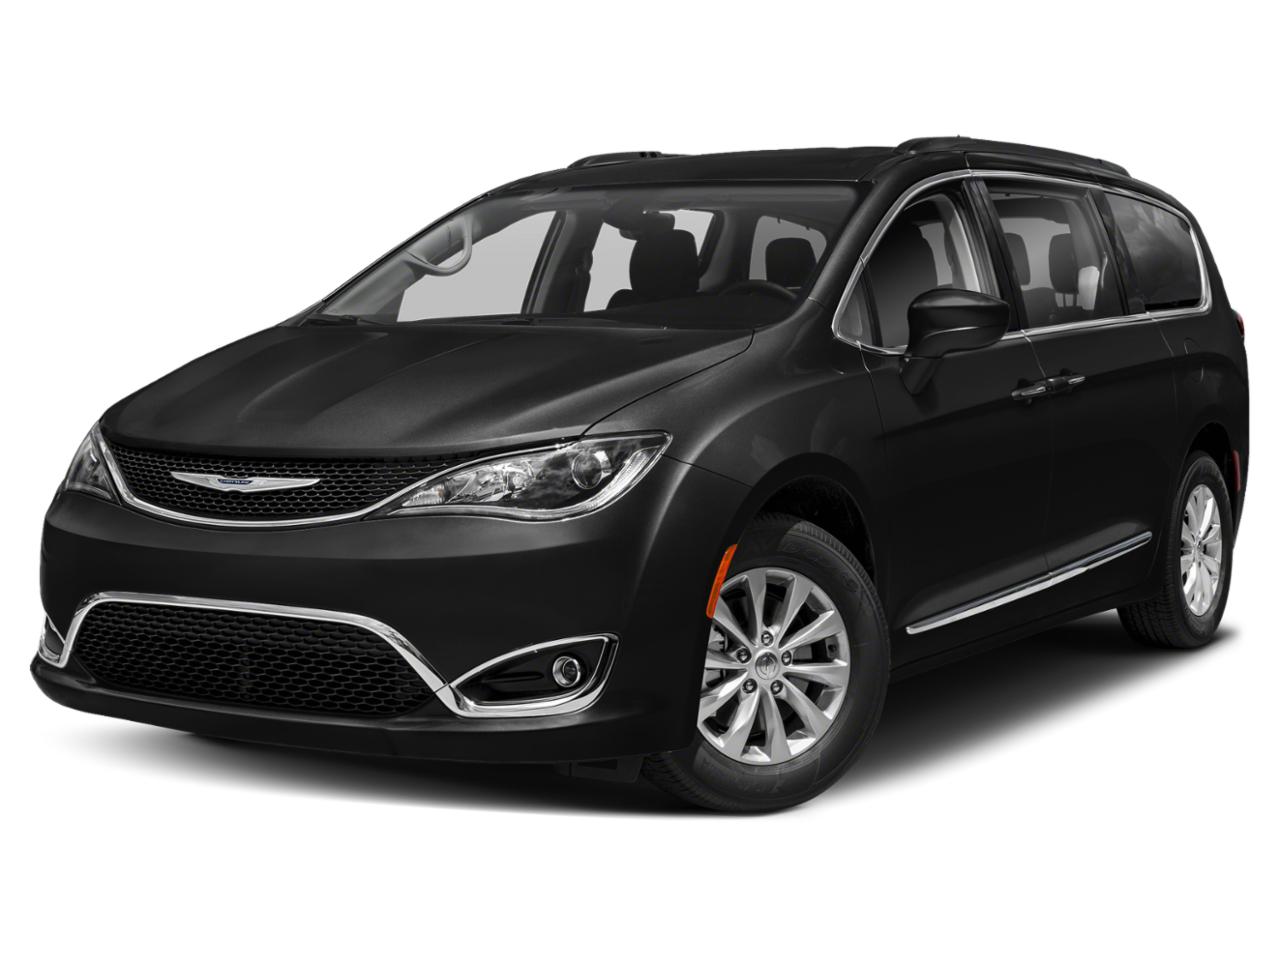 2020 Chrysler Pacifica Vehicle Photo in Saint Charles, IL 60174